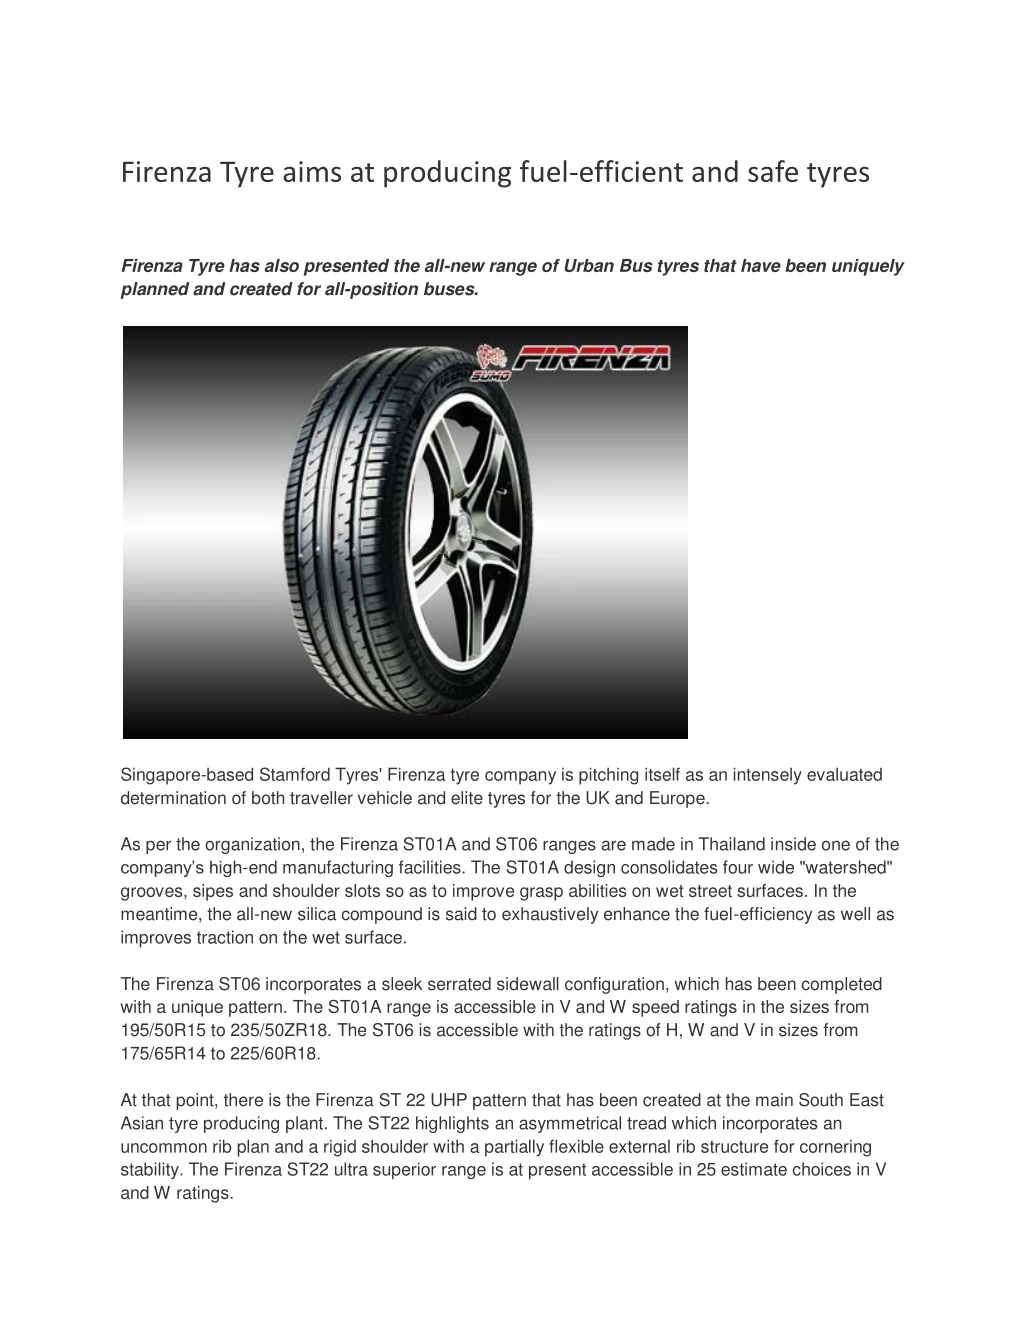 firenza tyre aims at producing fuel efficient